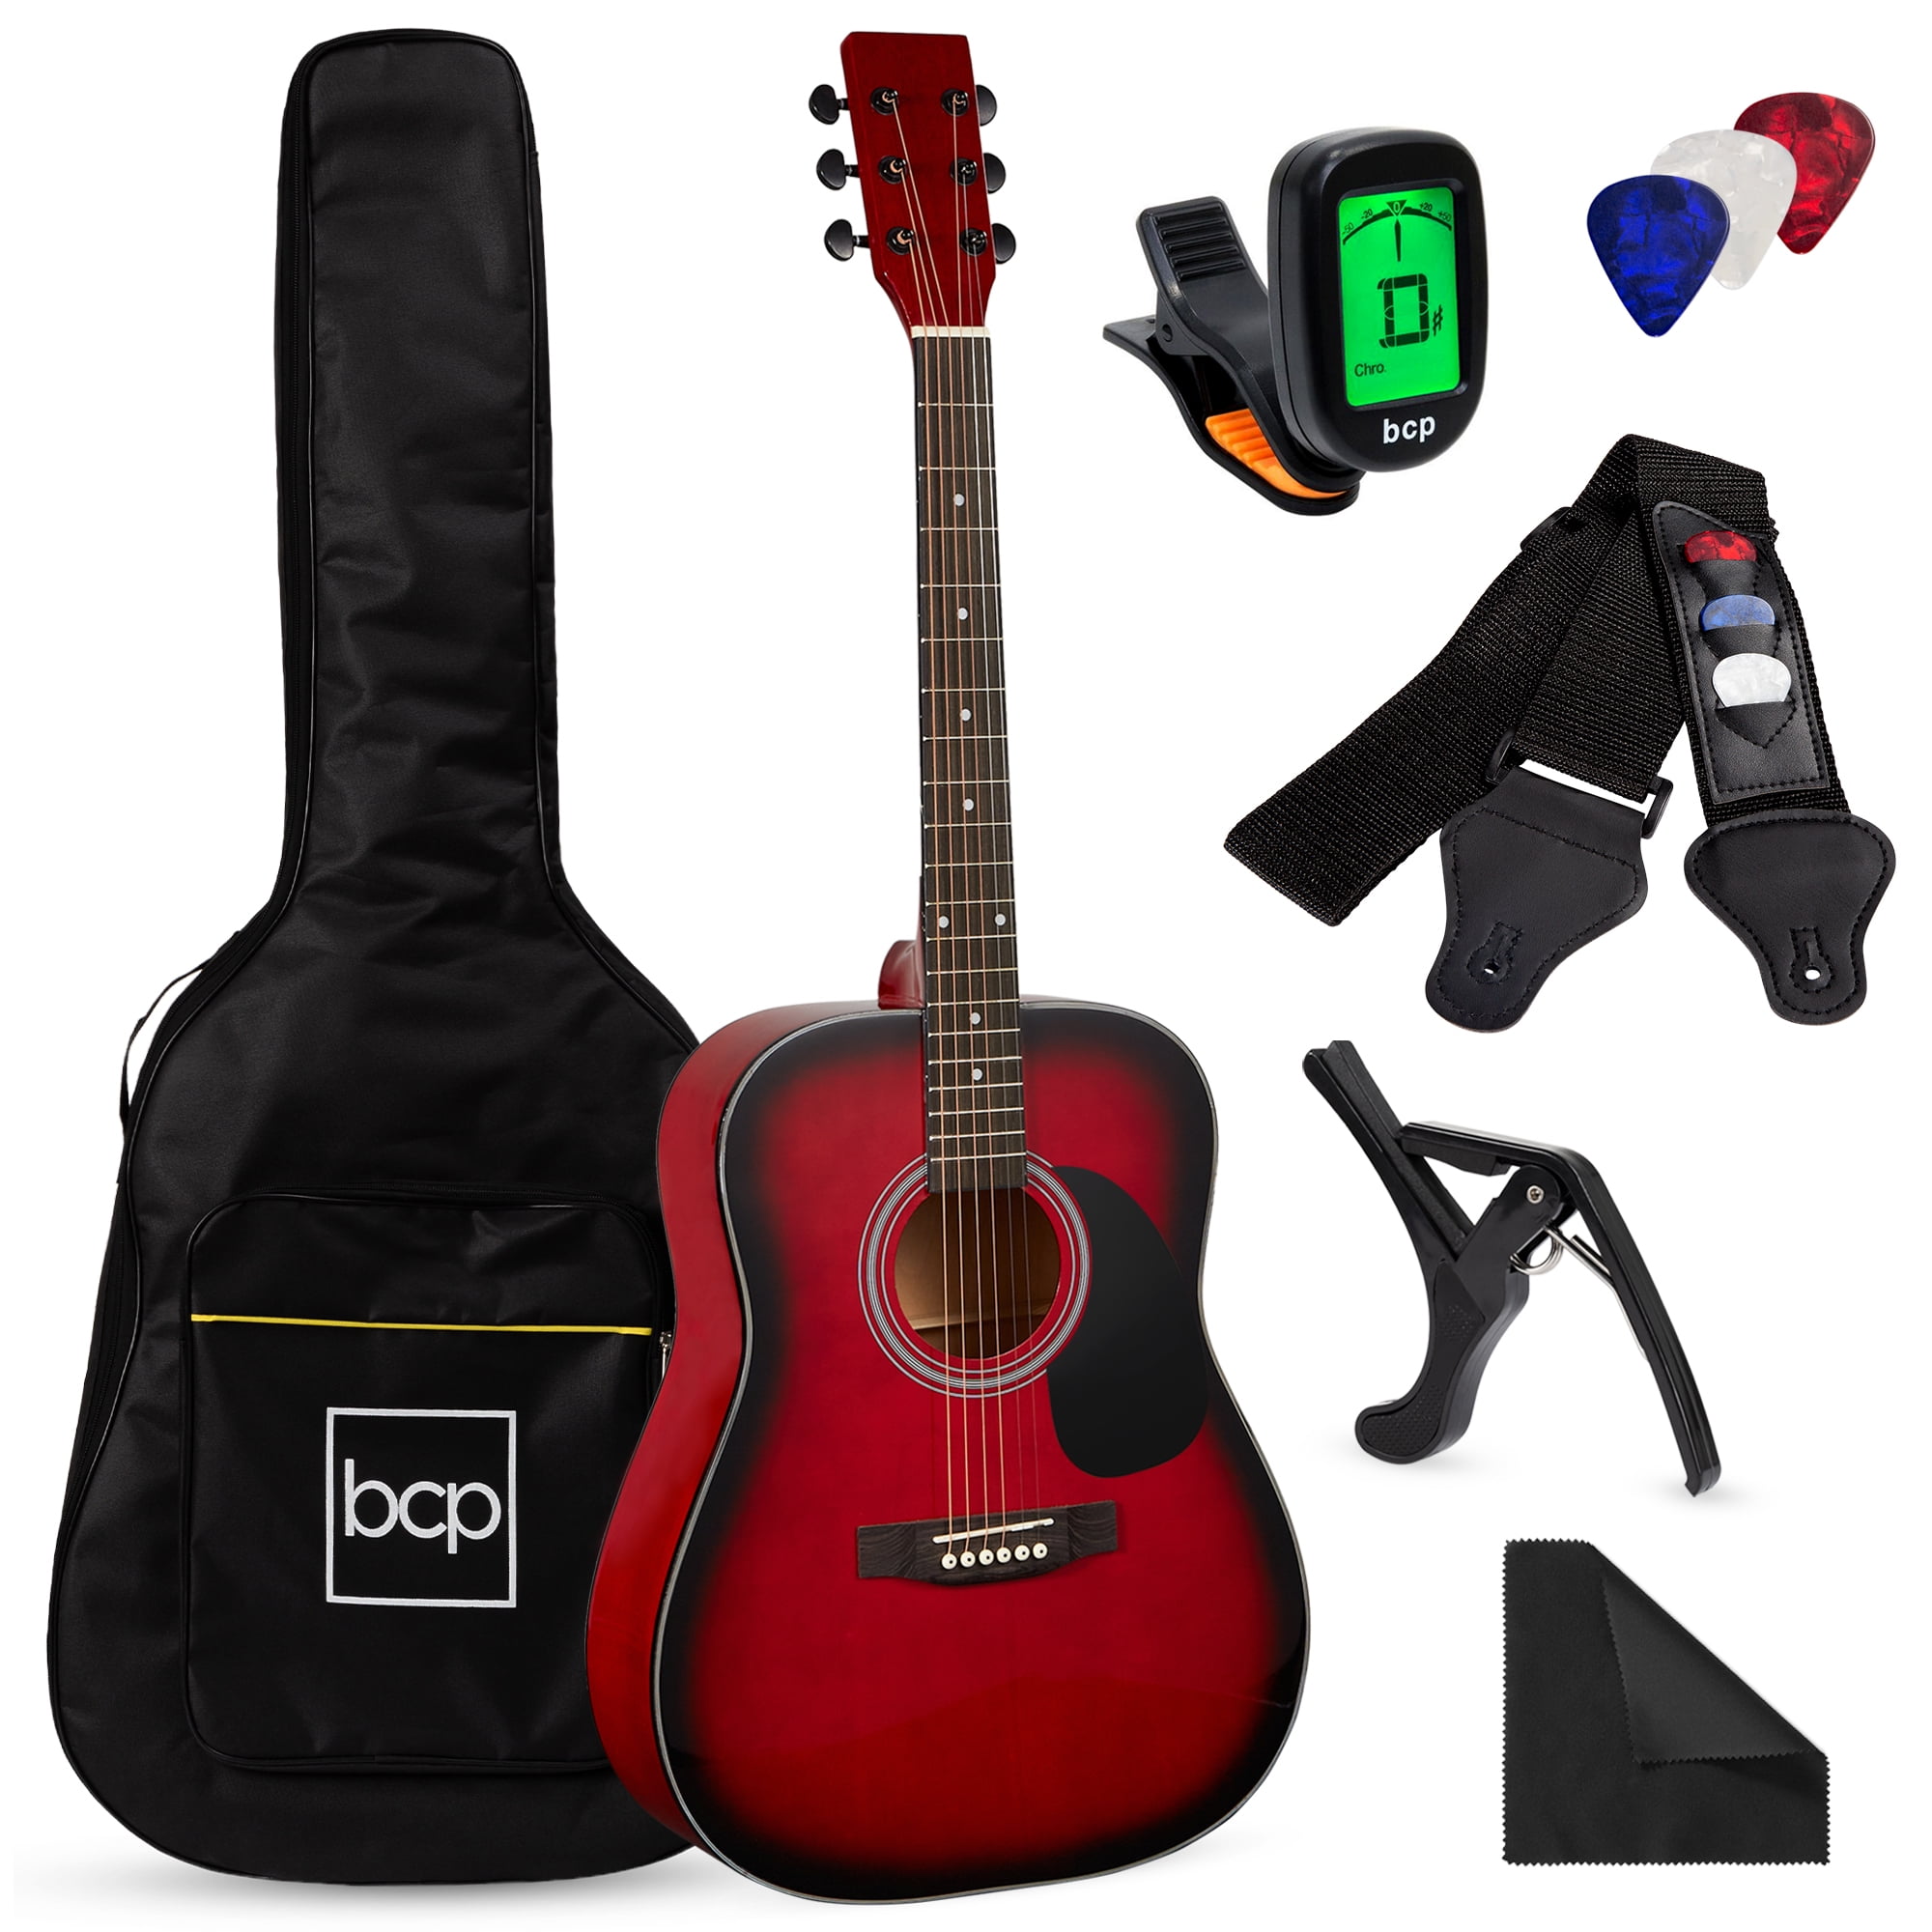 Best Choice Products 41" Full Size All-Wood Acoustic Guitar Starter Kit with Gig Bag, E-Tuner, Pick and Strap, Red Burst